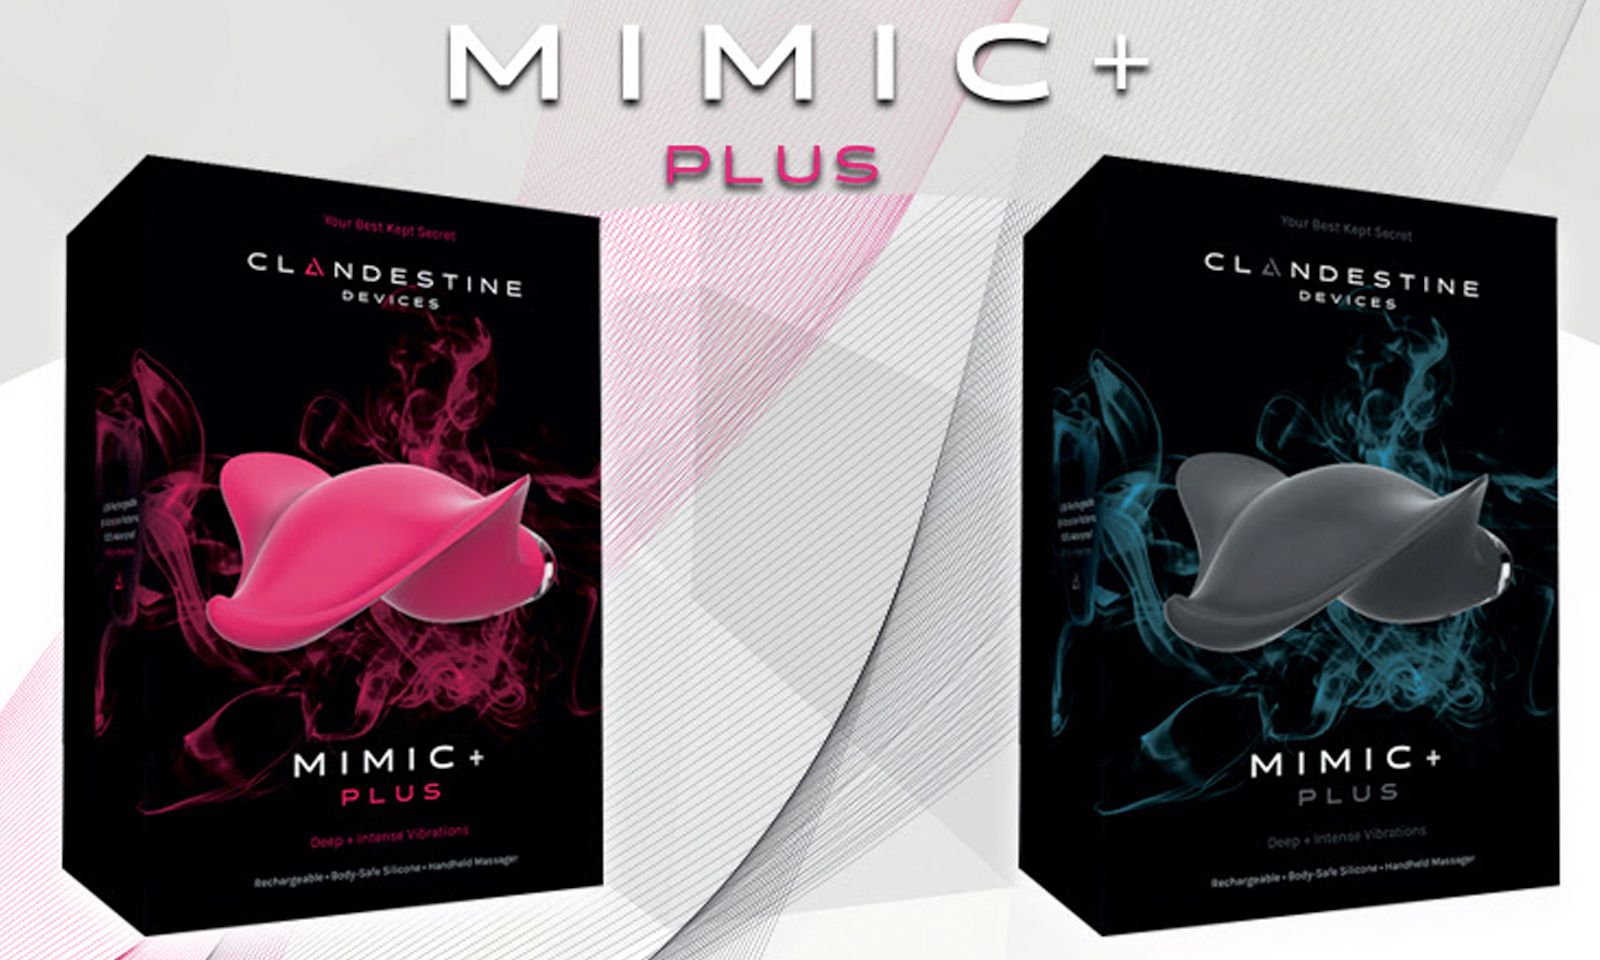 NYC’s Museum of Sex Adds Mimic + Plus to Curated Collection